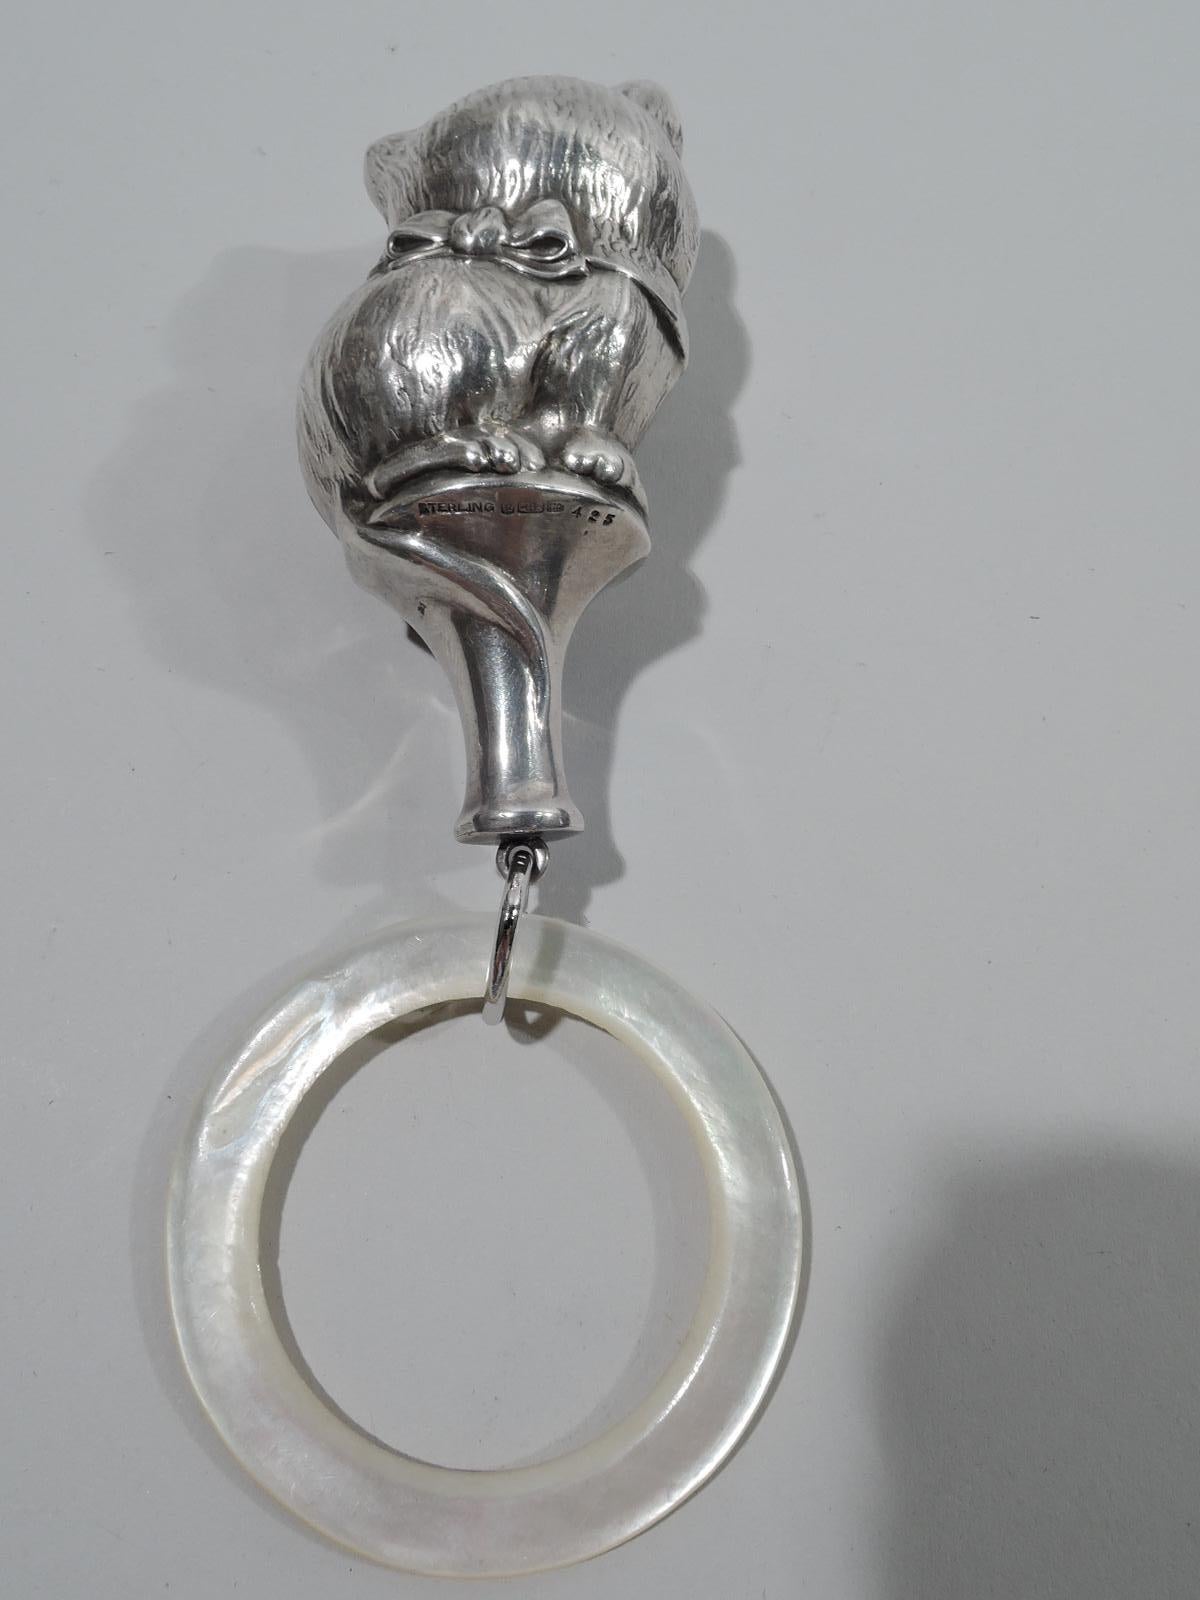 Edwardian sterling silver baby rattle. Made by R. Blackinton & Co. in North Attleboro, Mass., ca 1910. Feline figure with erect ears, self-satisfied expression, fluffball haunches, and tail hanging over and wrapping around the pedestal to which is